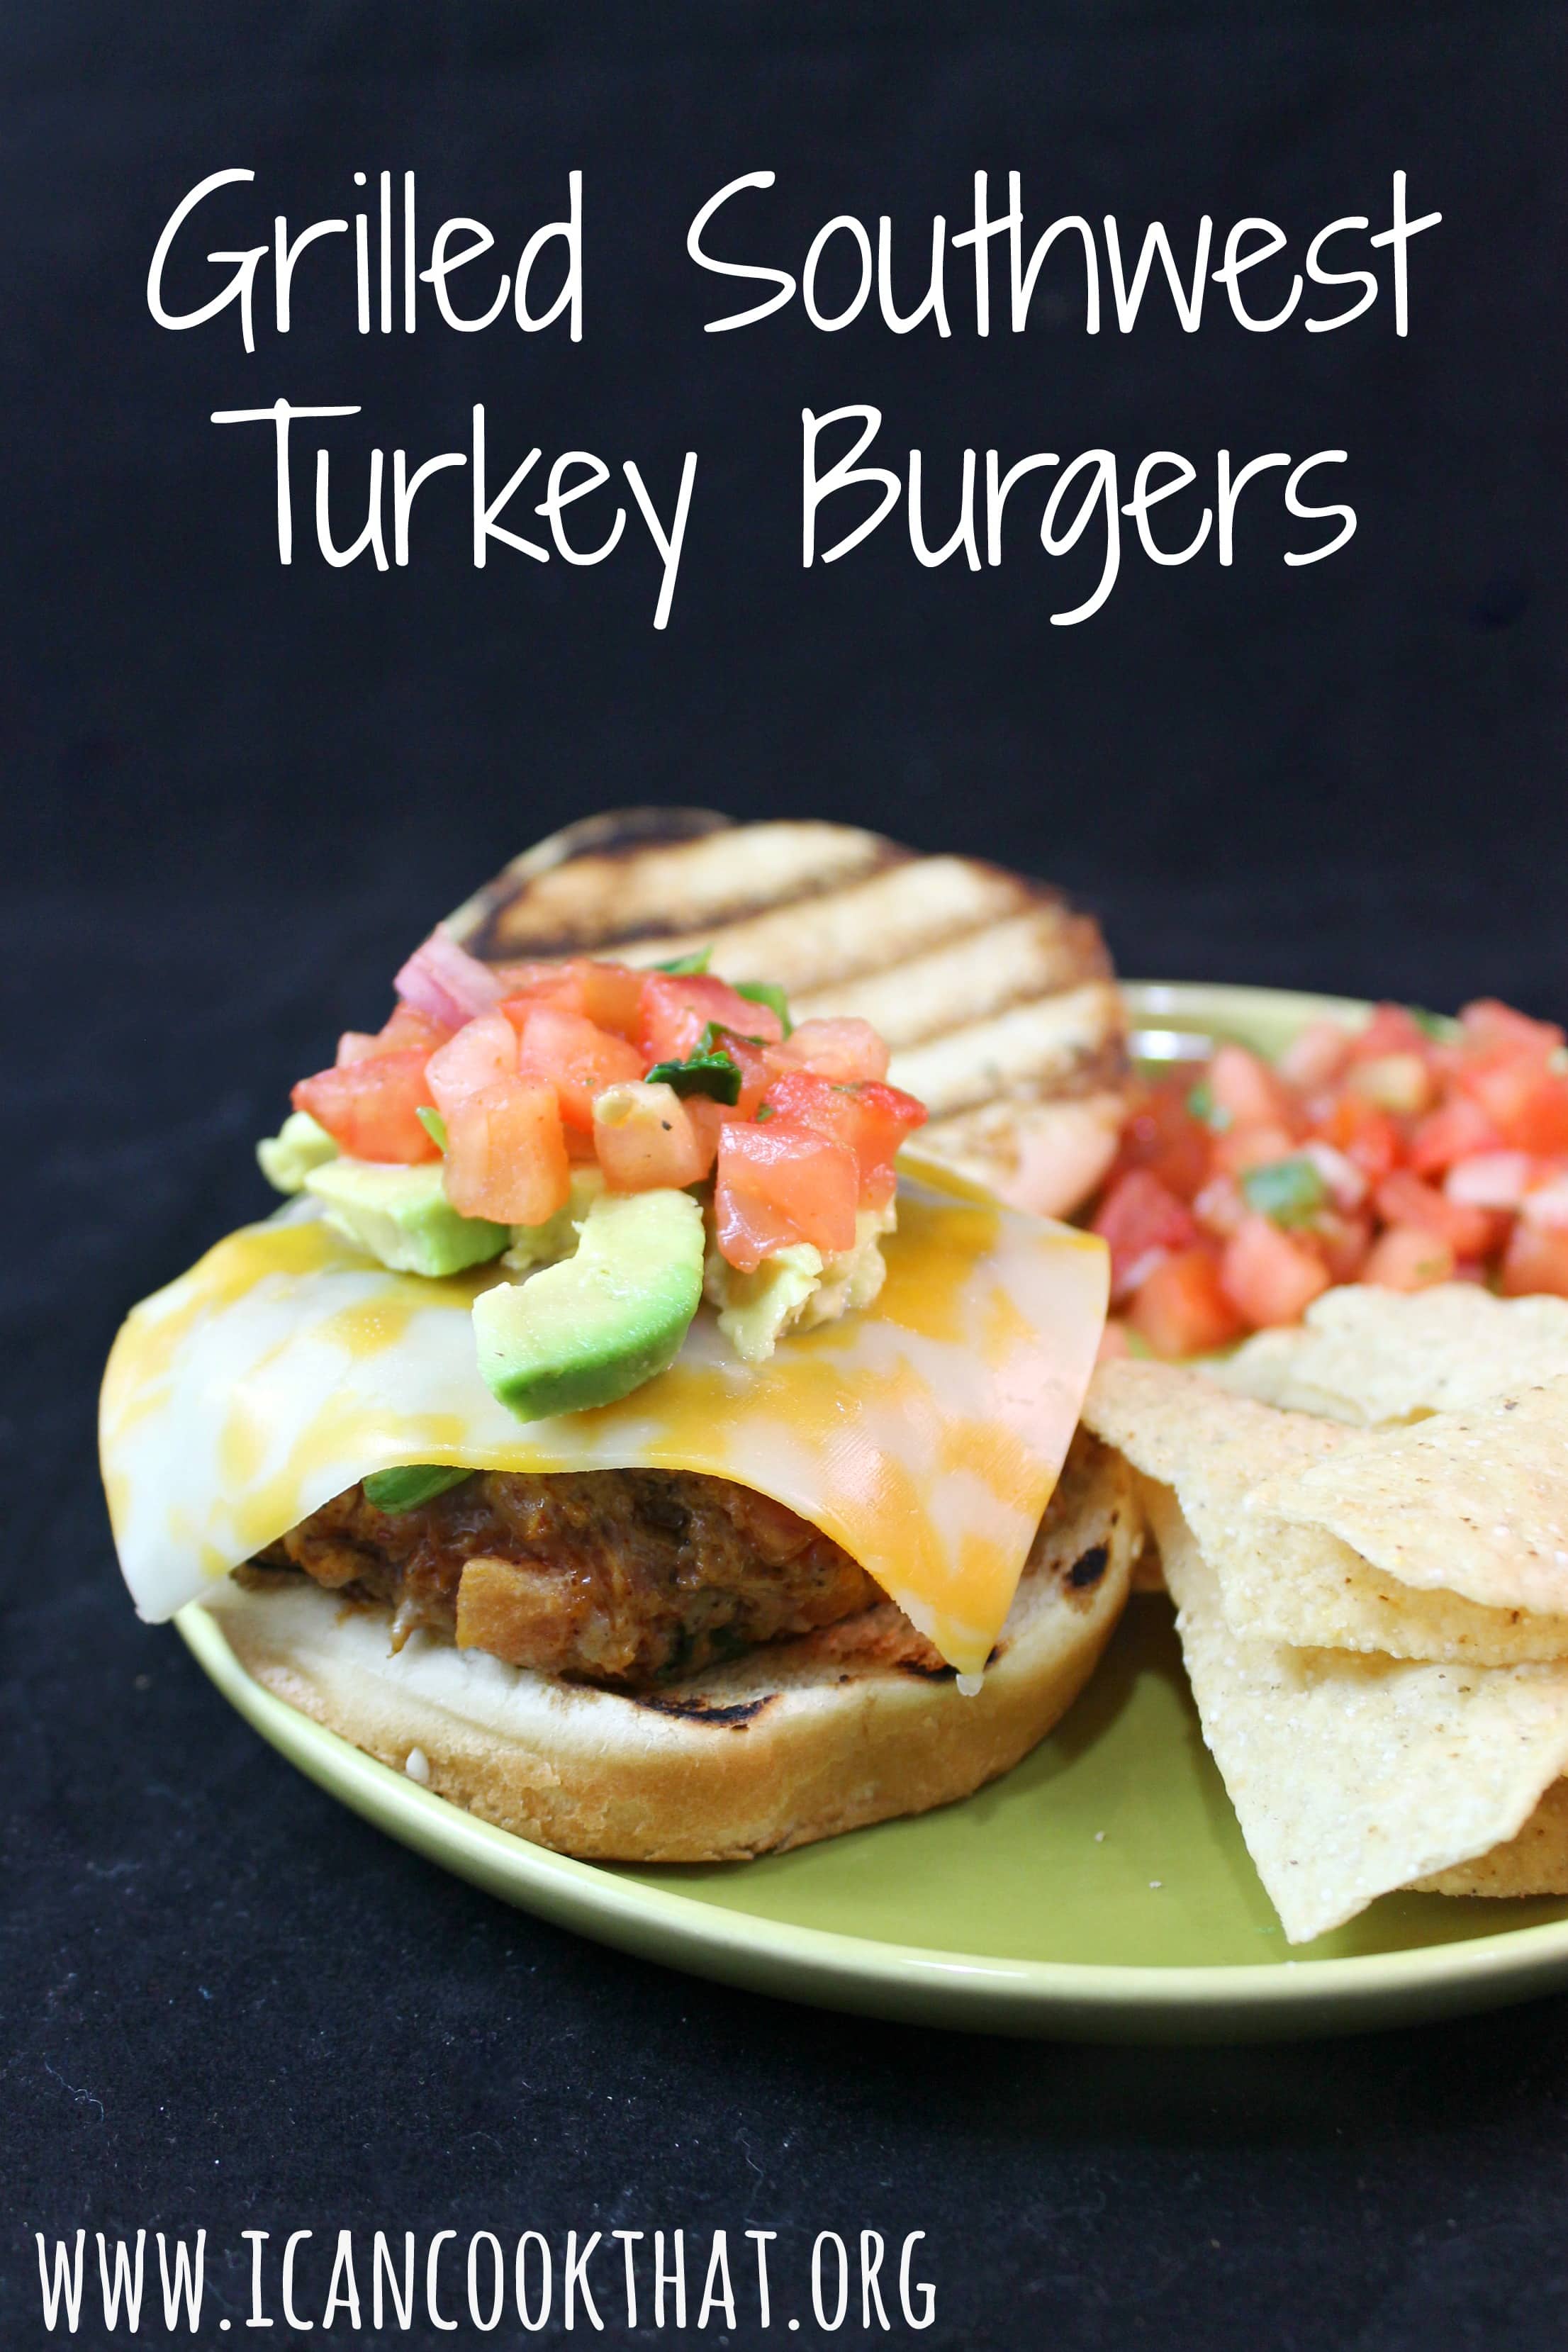 Grilled Southwest Turkey Burgers Recipe I Can Cook That